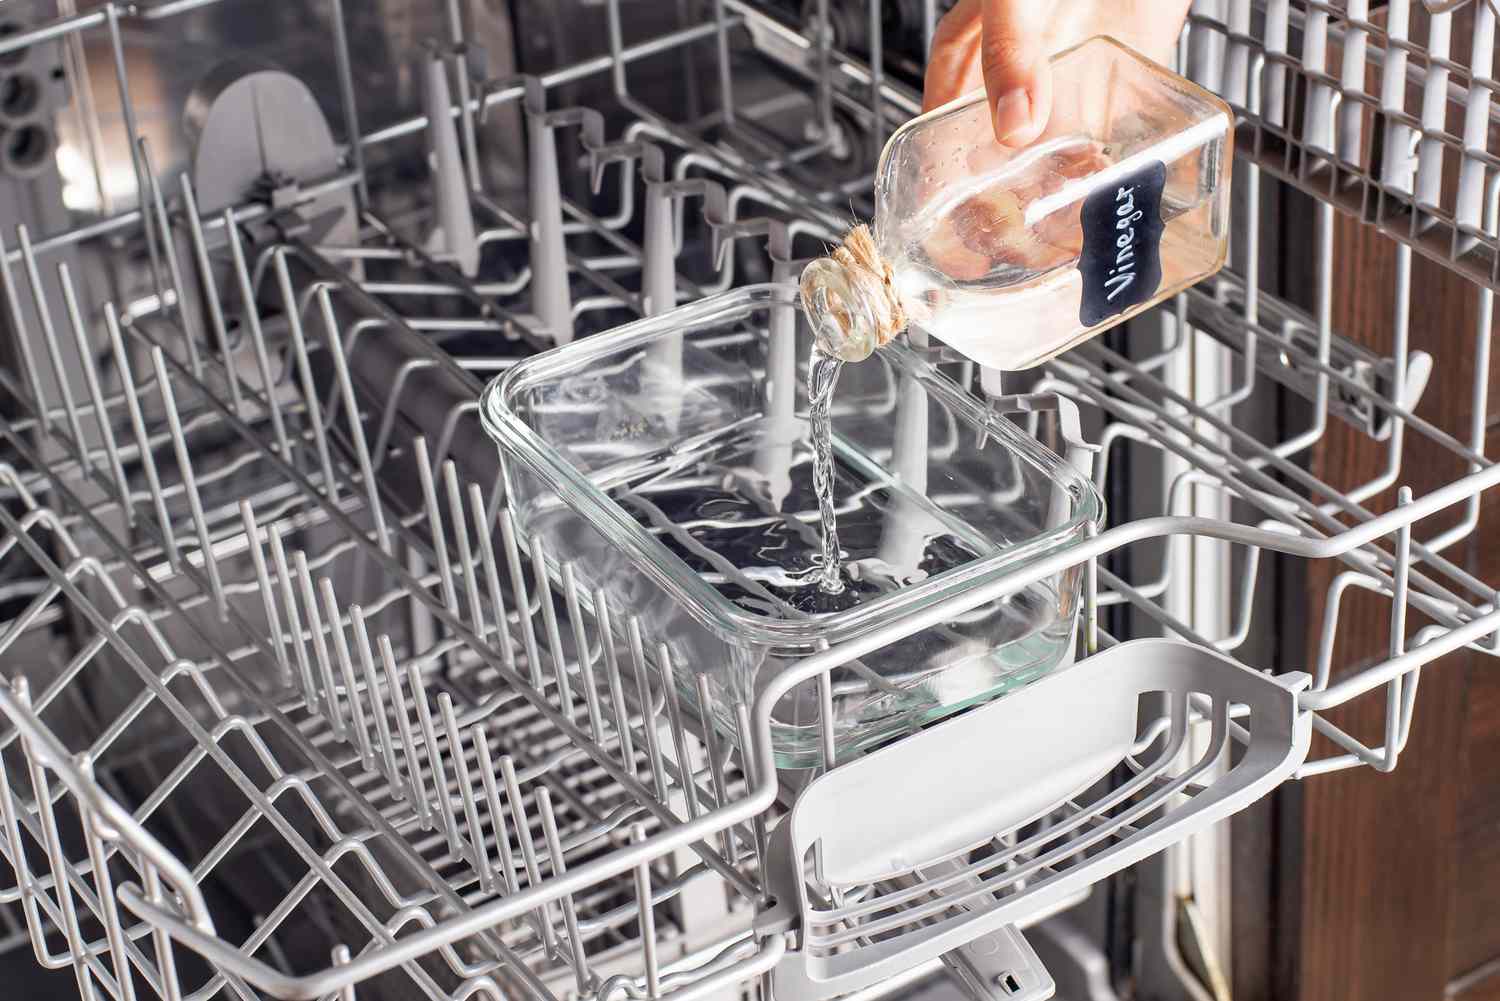 Clean Your Dishwasher 1